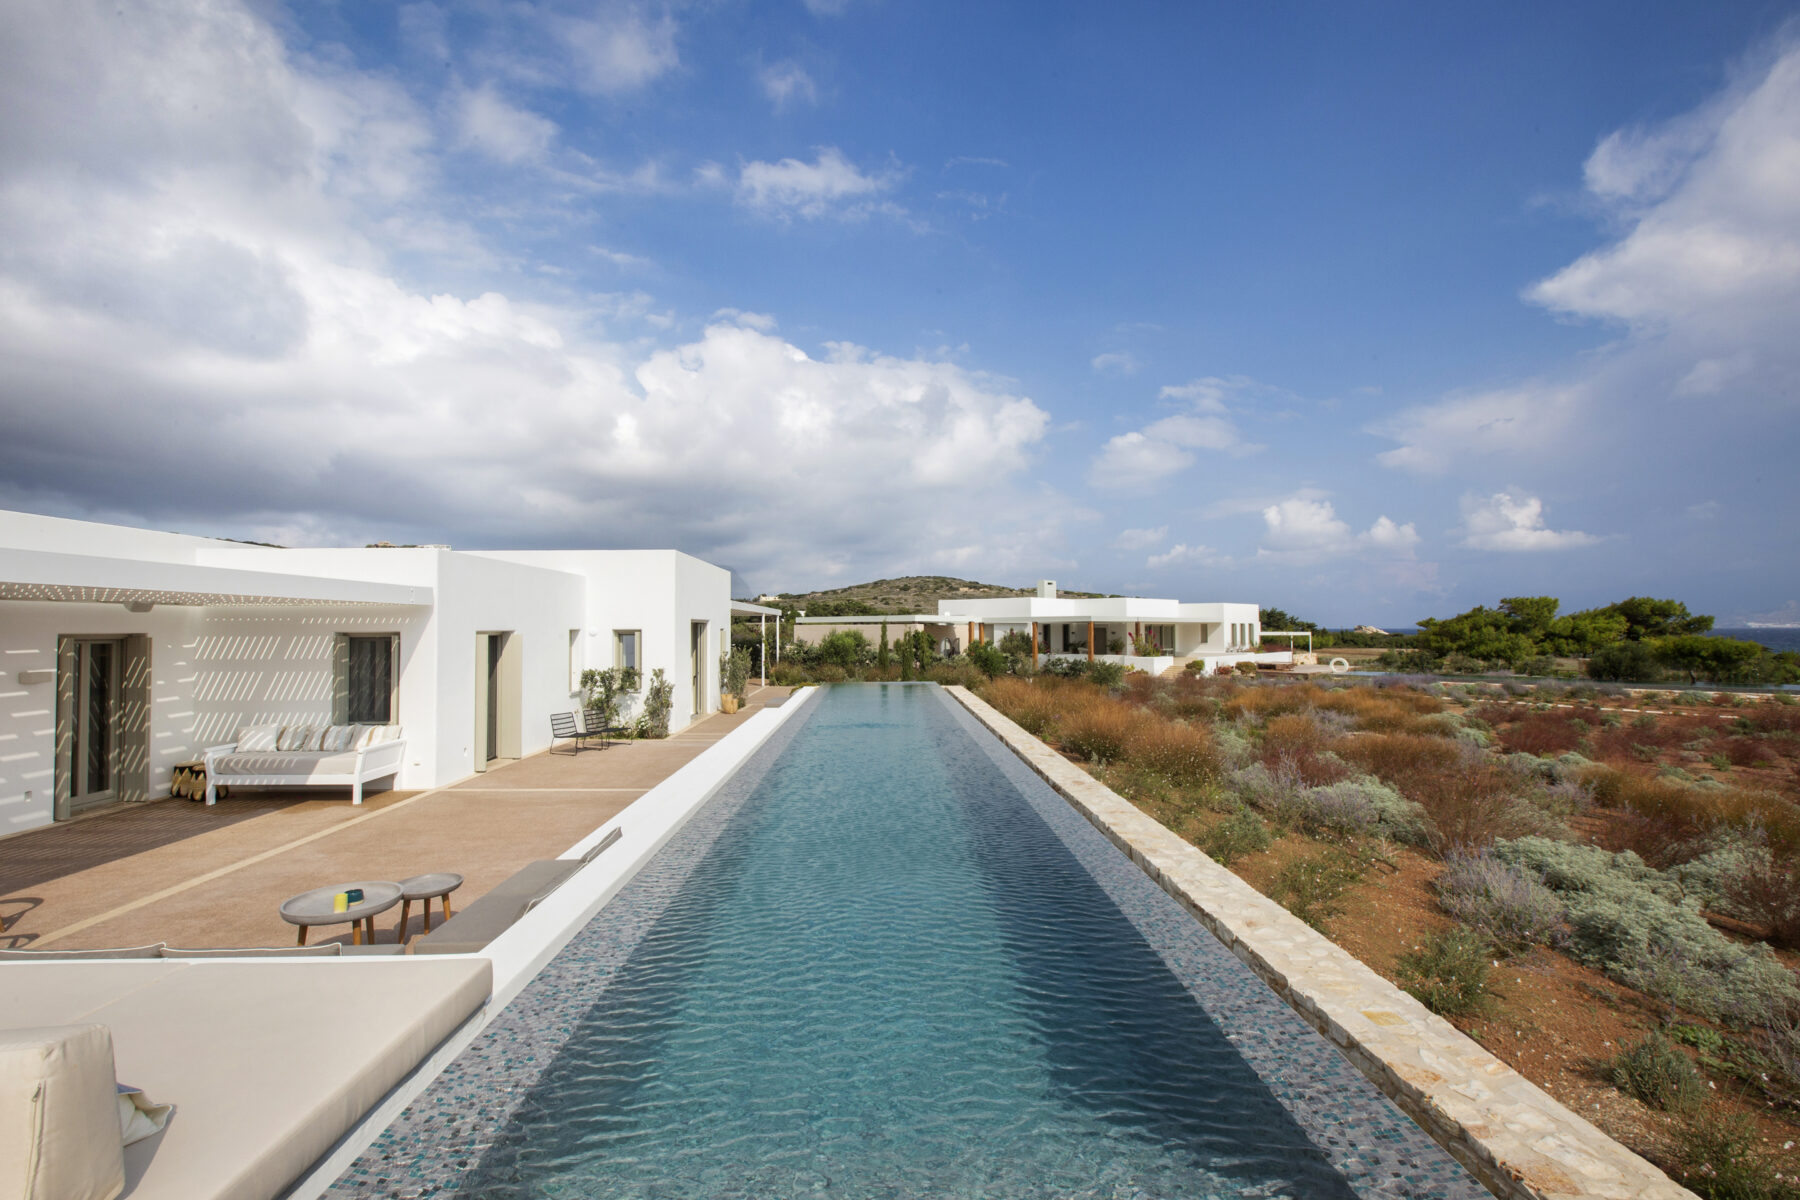 Archisearch VNN project - A vacation house in Paros, Greece by Maria Doxa Architecture studio